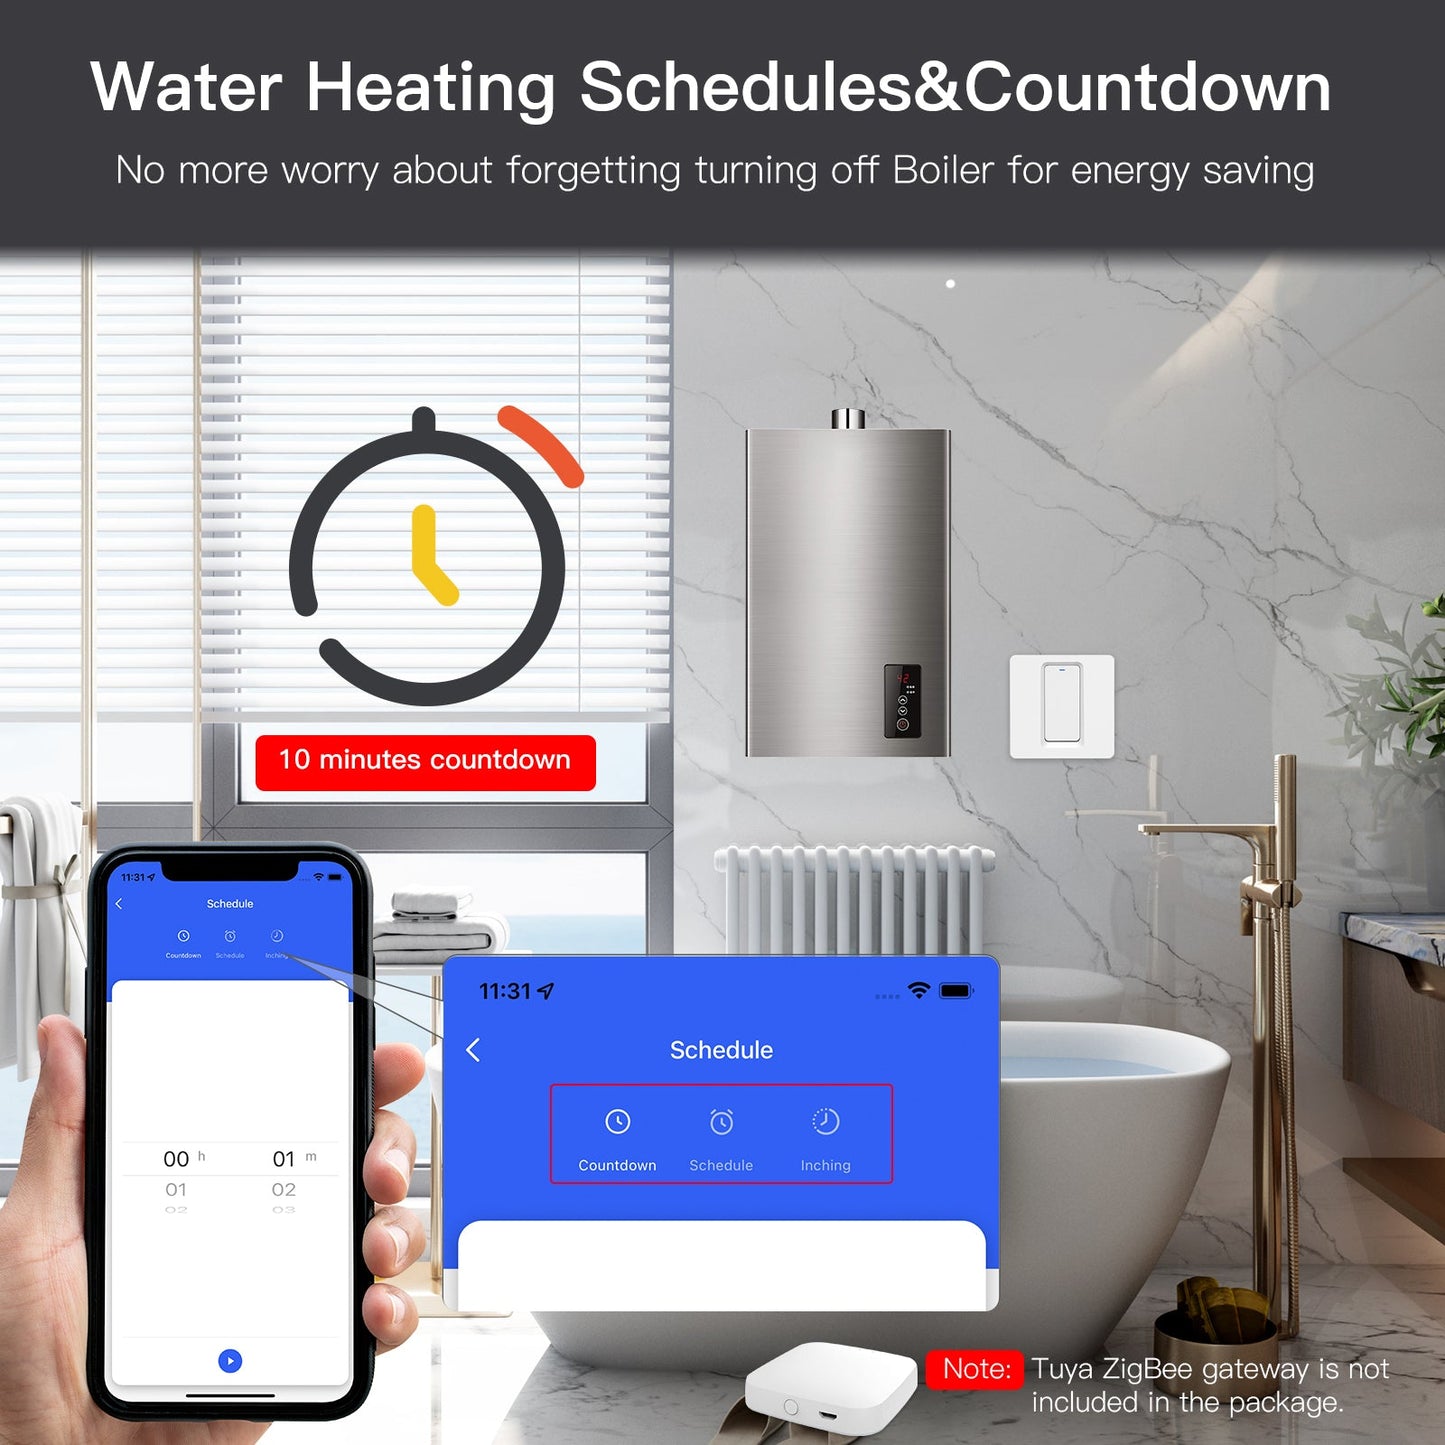 No more worry about forgetting turning off Boiler for energy saving - MOES